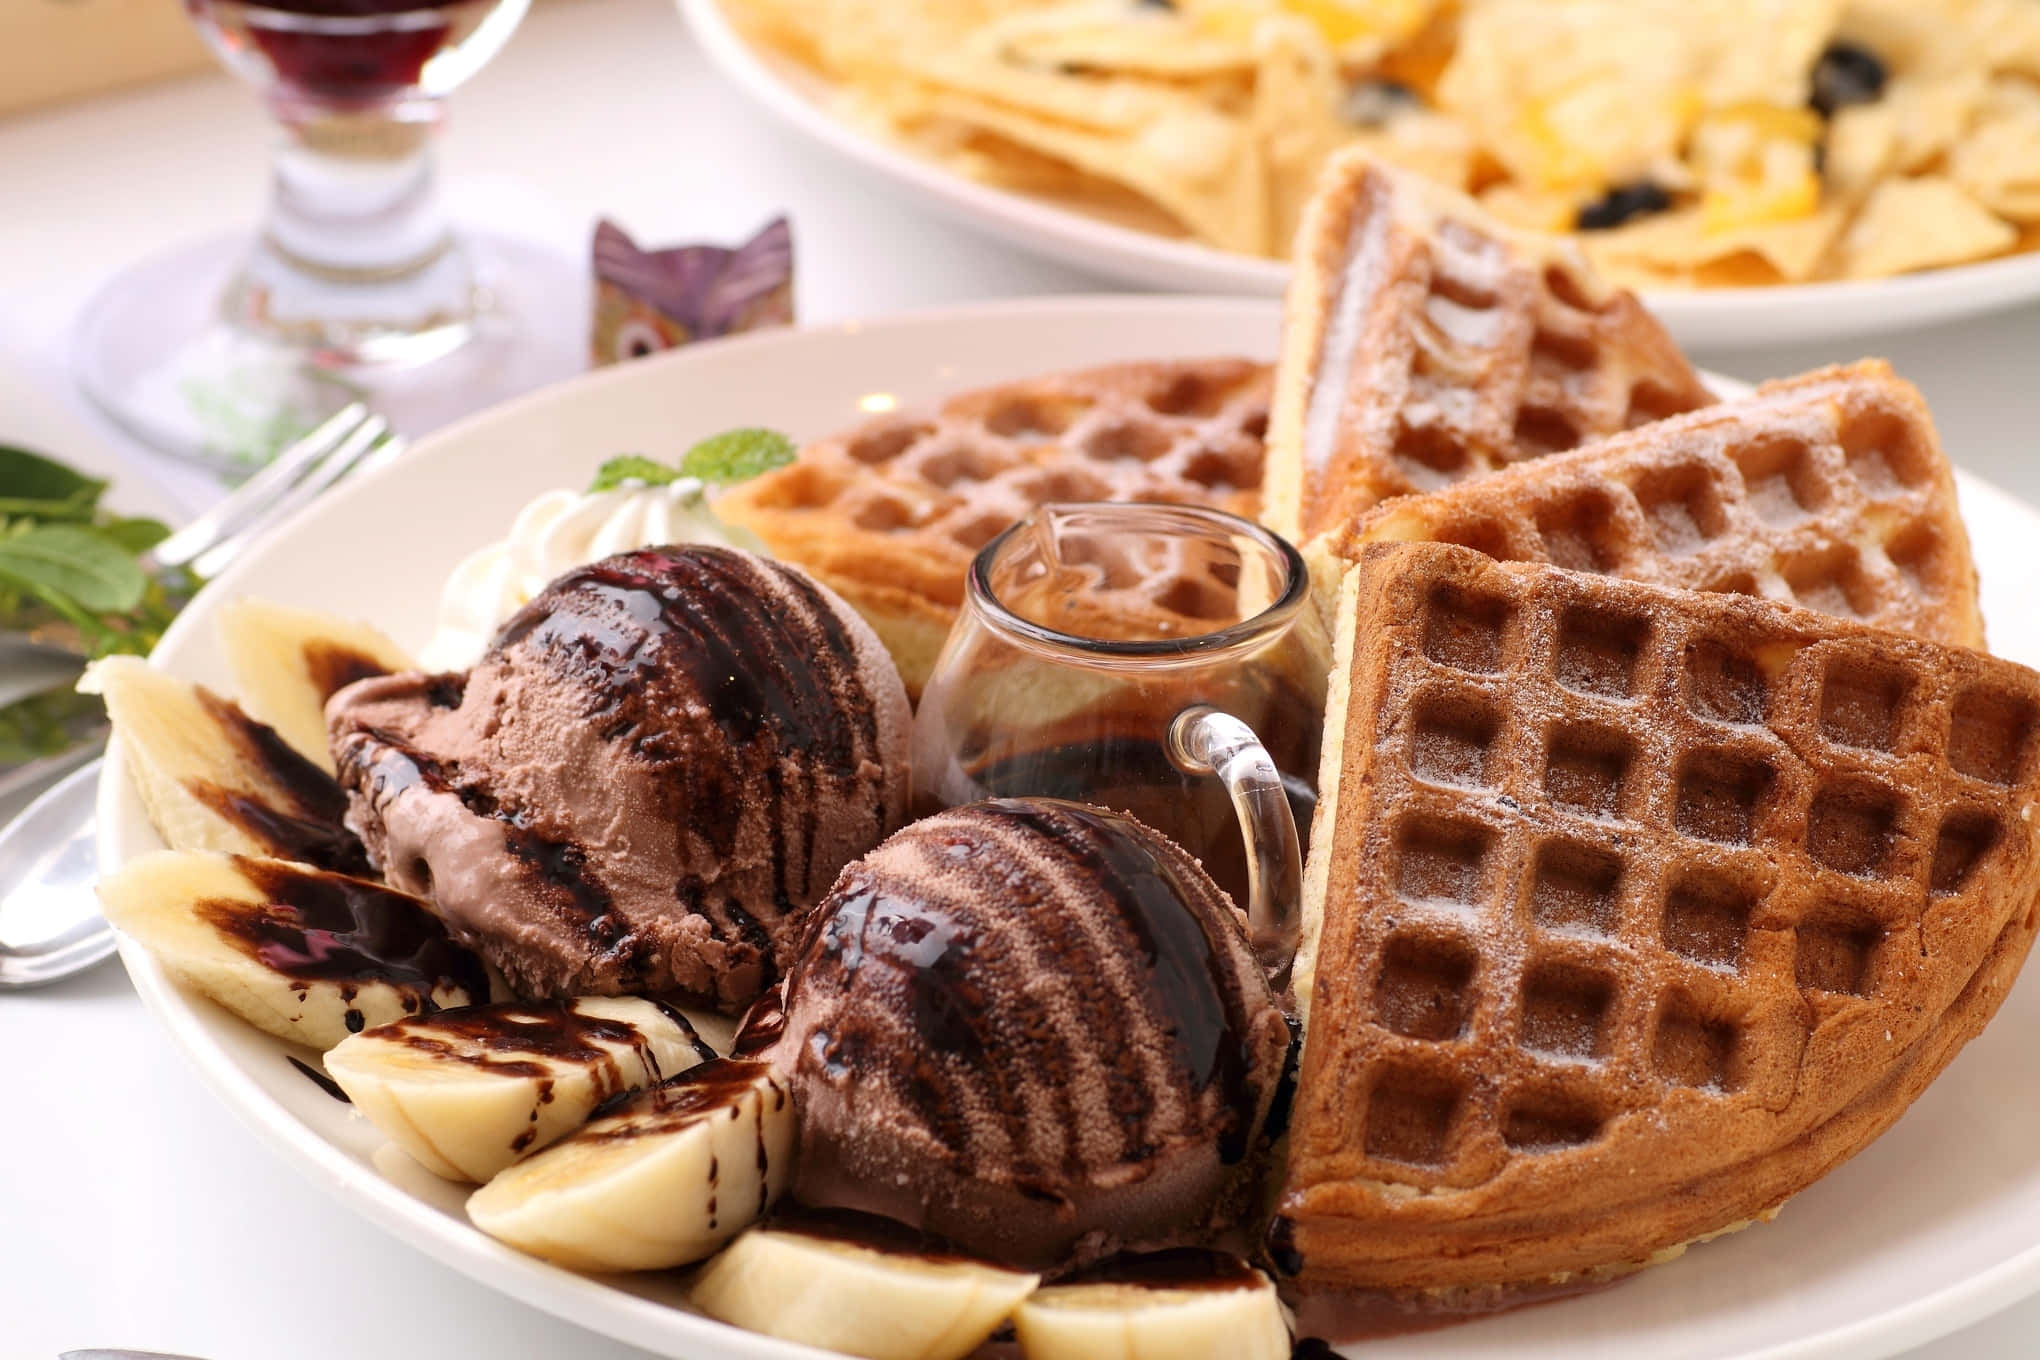 A stack of delicious golden waffles on a plate